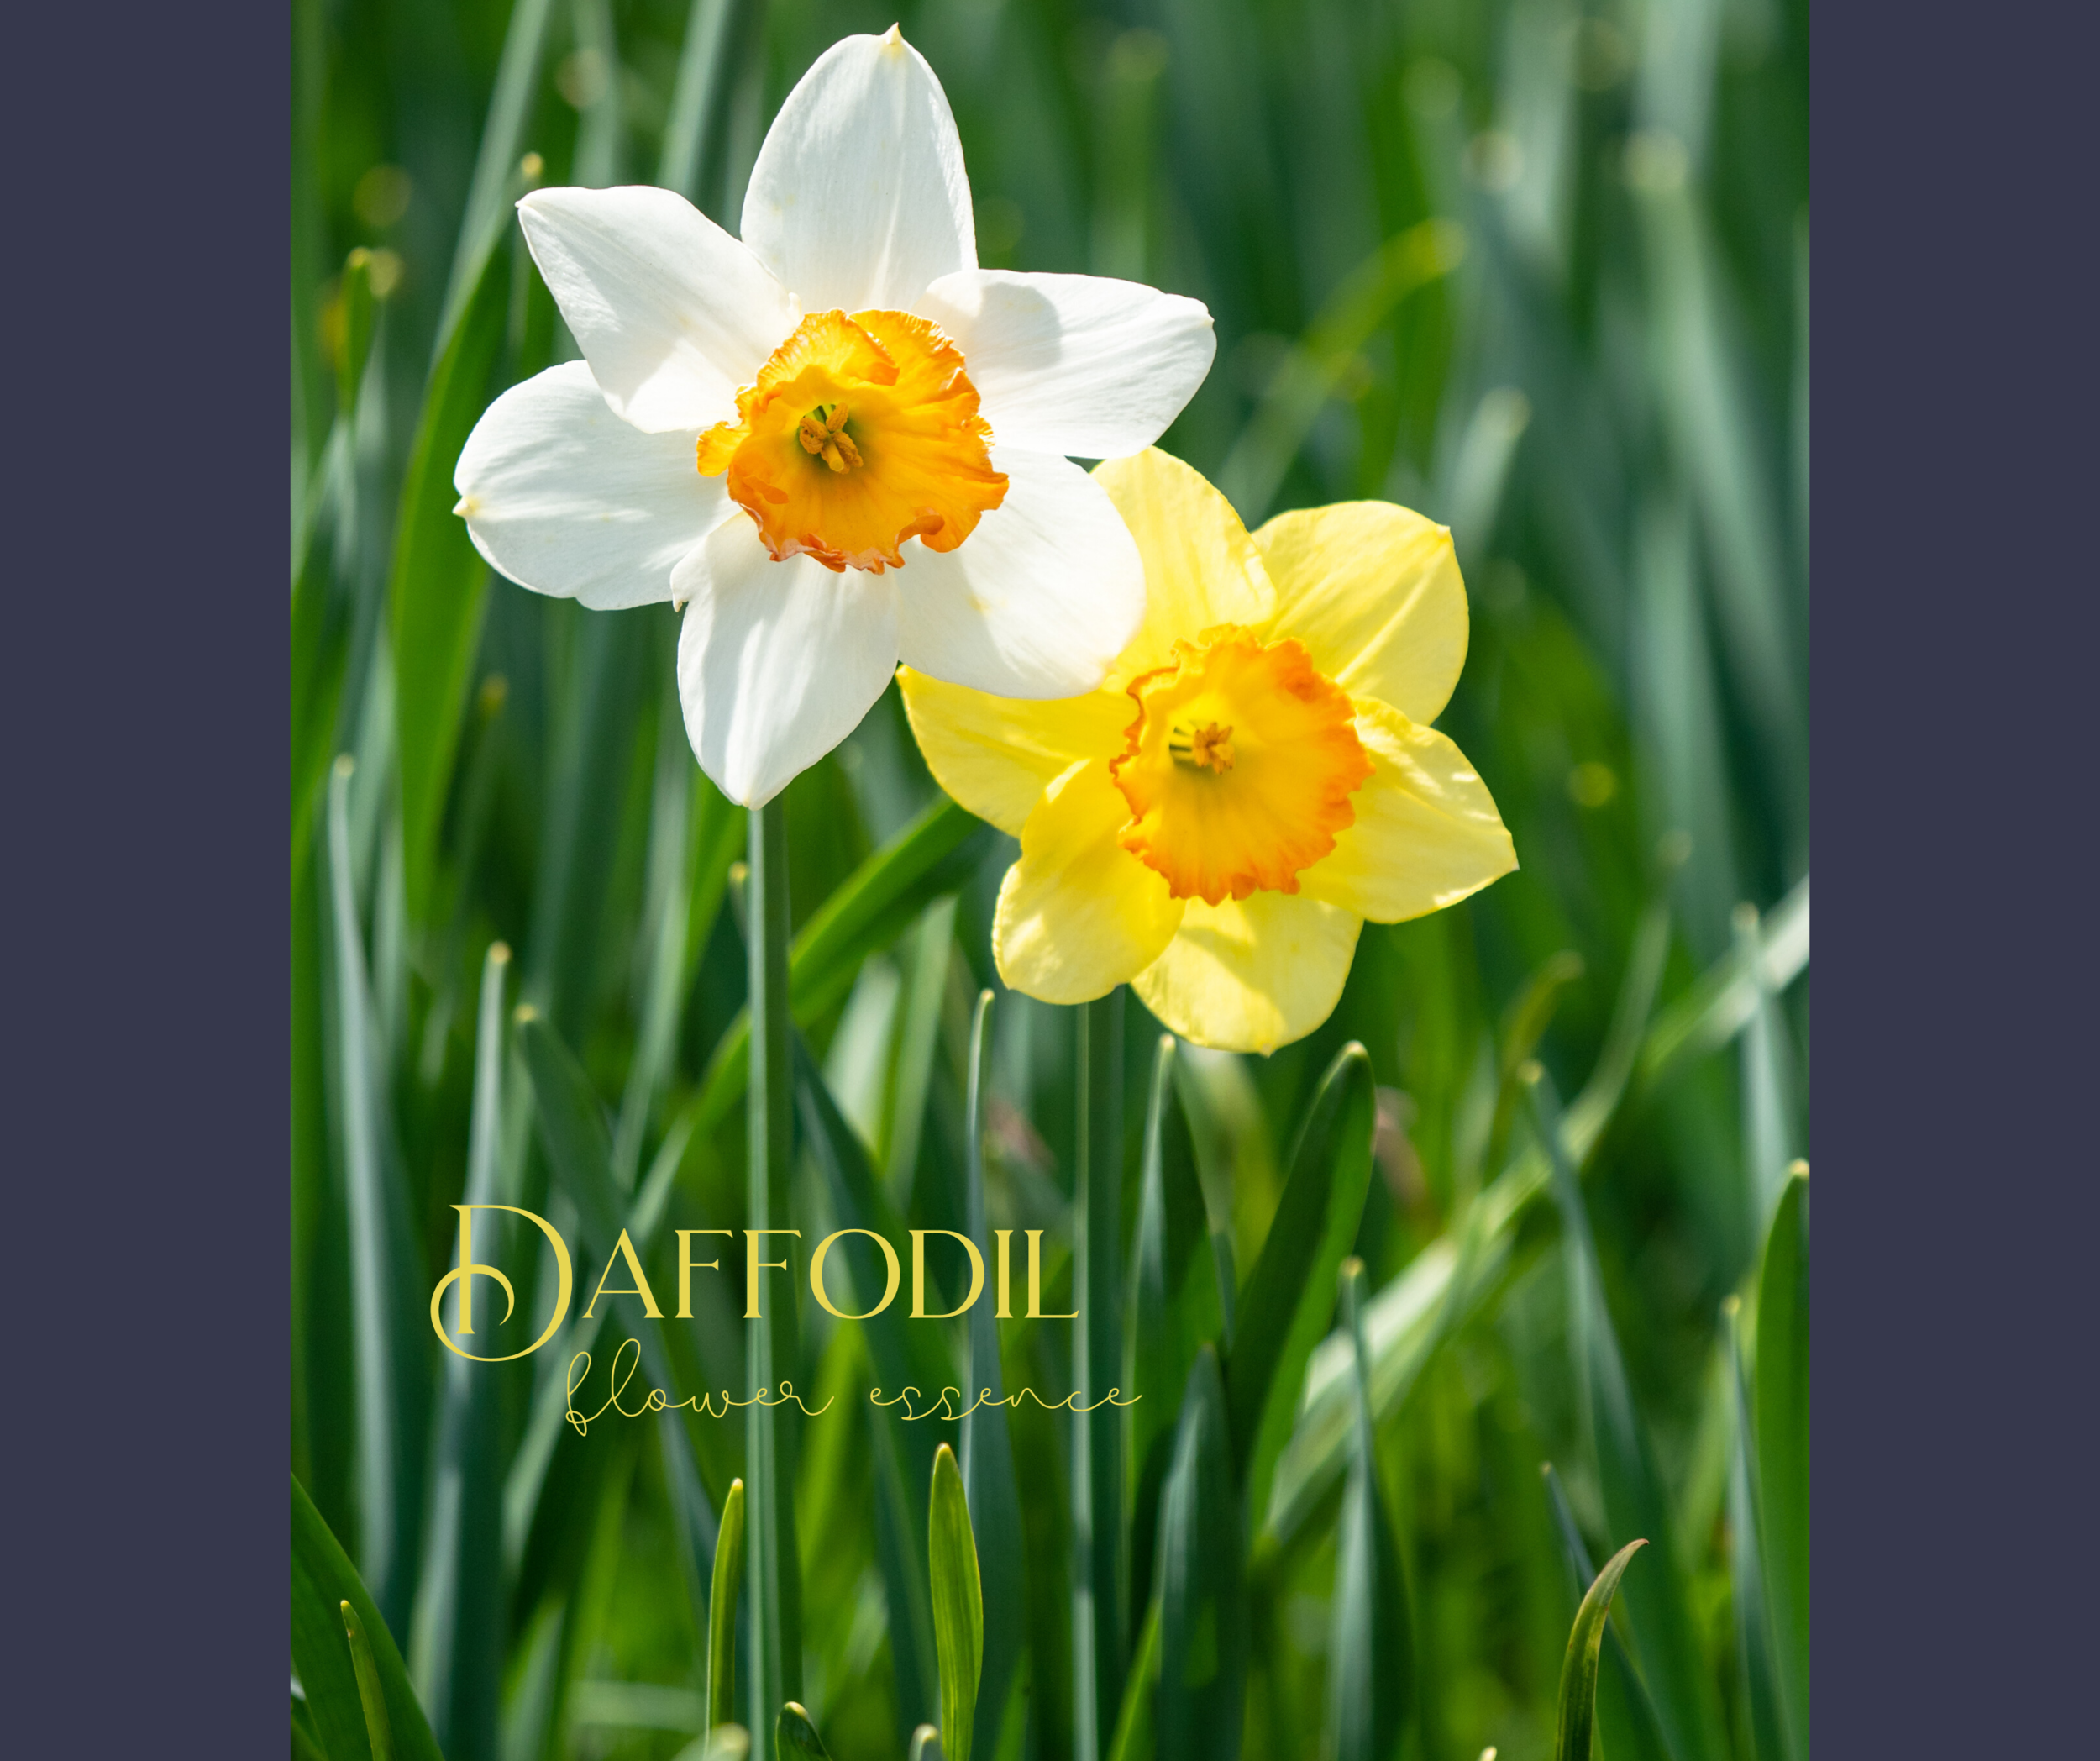 Daffodil Essence Cover Photo.png